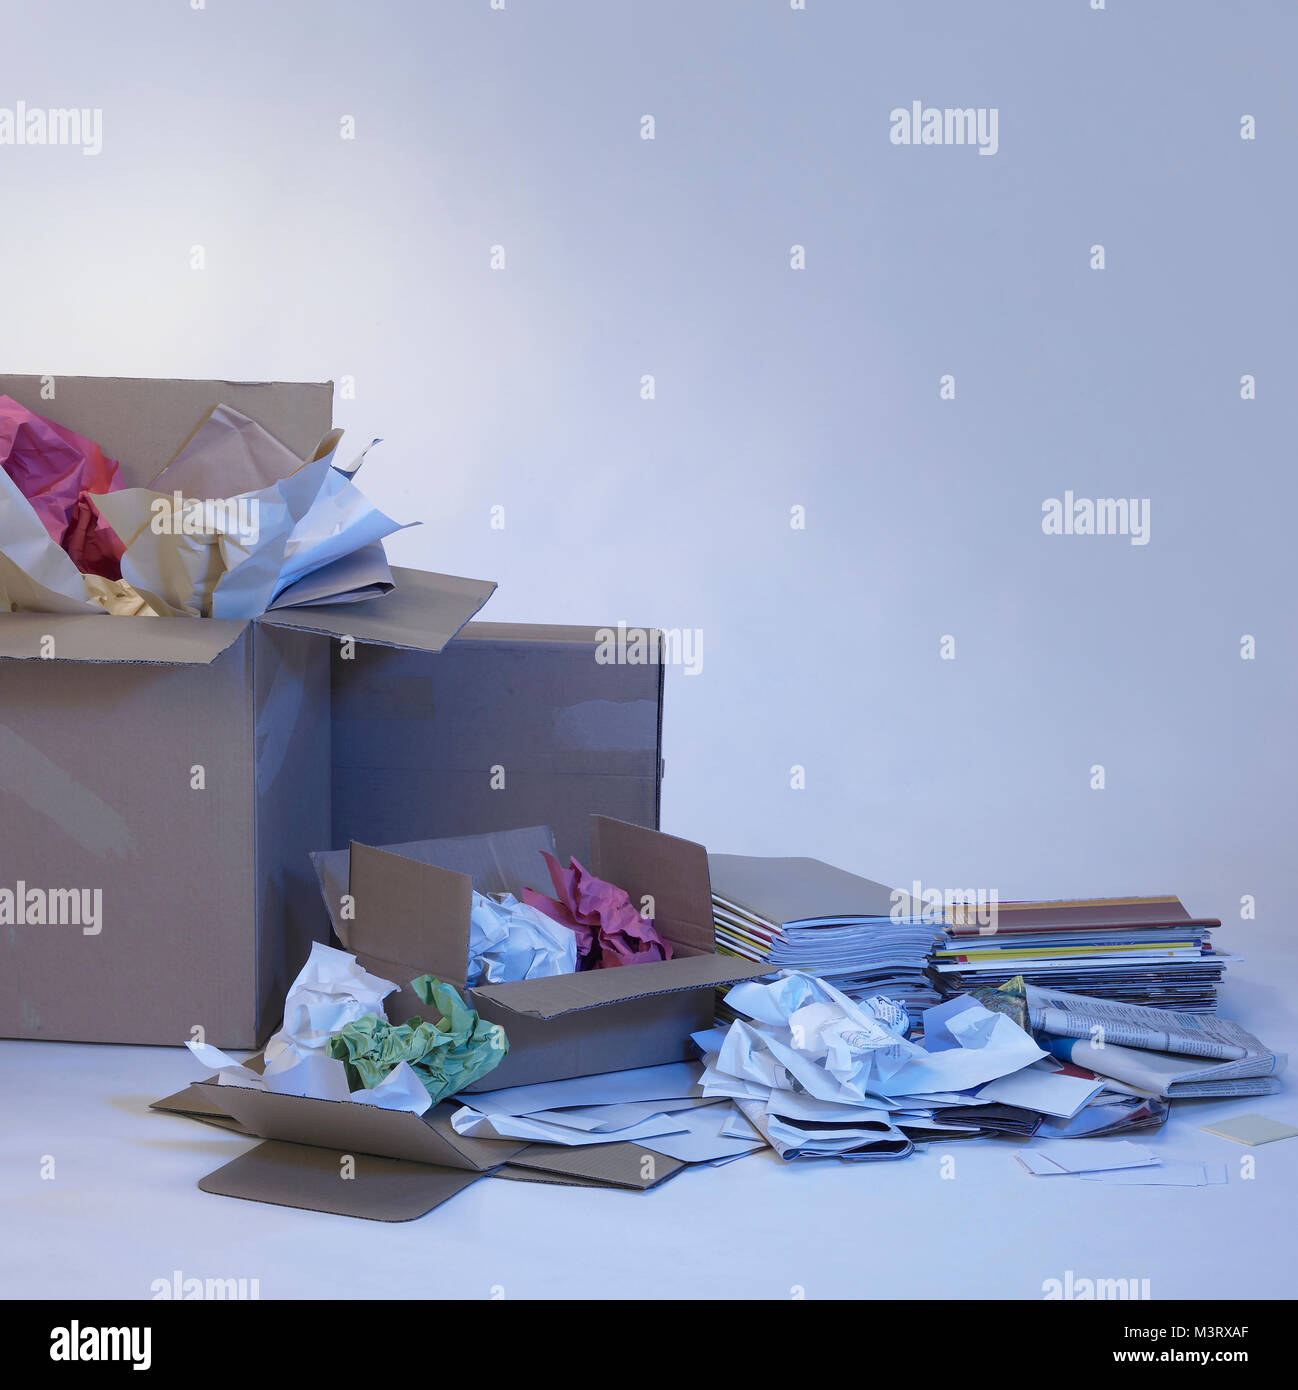 wastepaper and paper boxes in blue ambiance Stock Photo